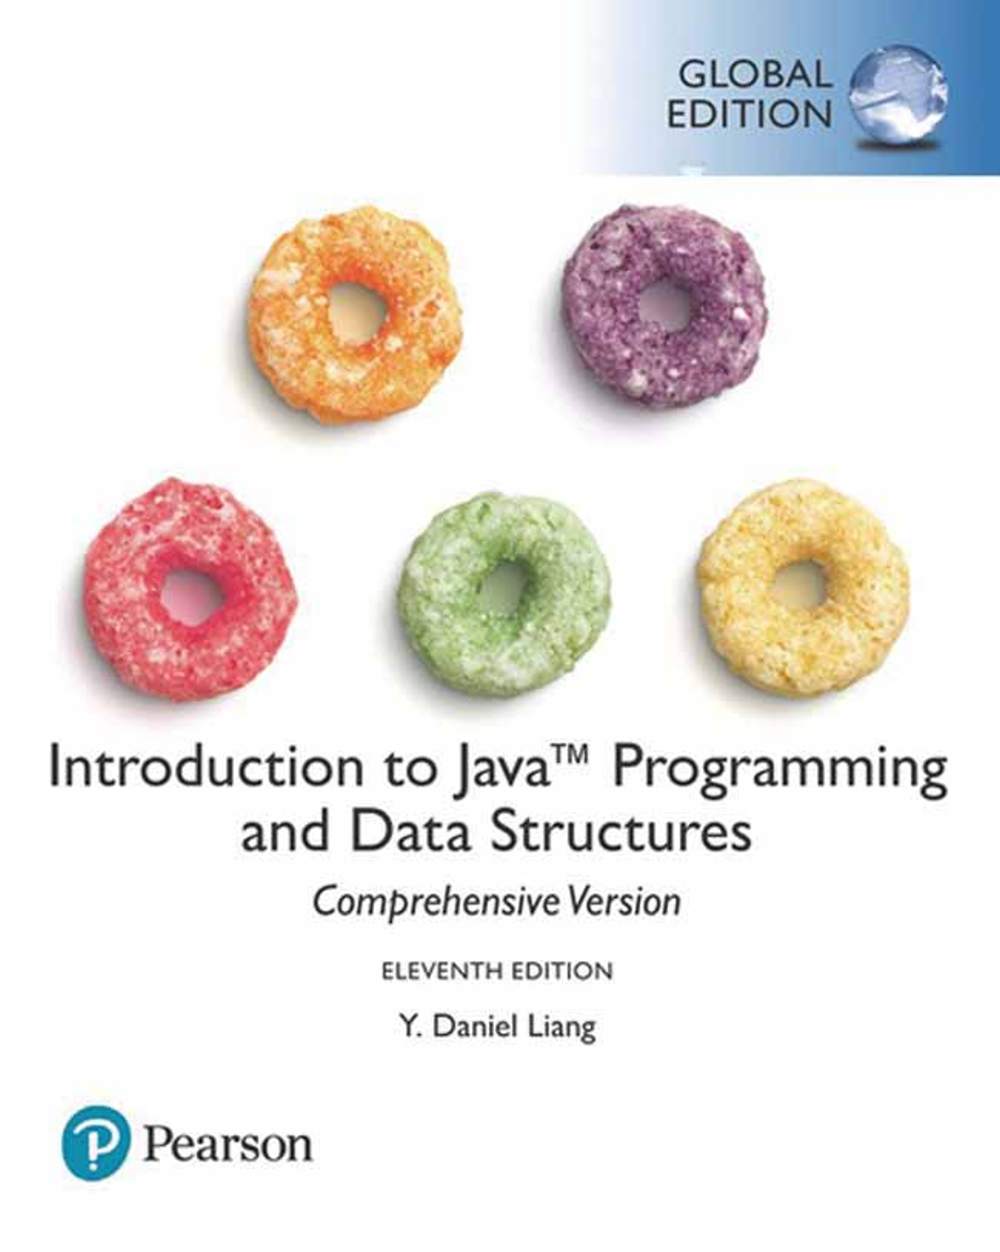 INTRODUCTION TO JAVA PROGRAMMING: COMPREHENSIVE VERSION 11/E (GE)